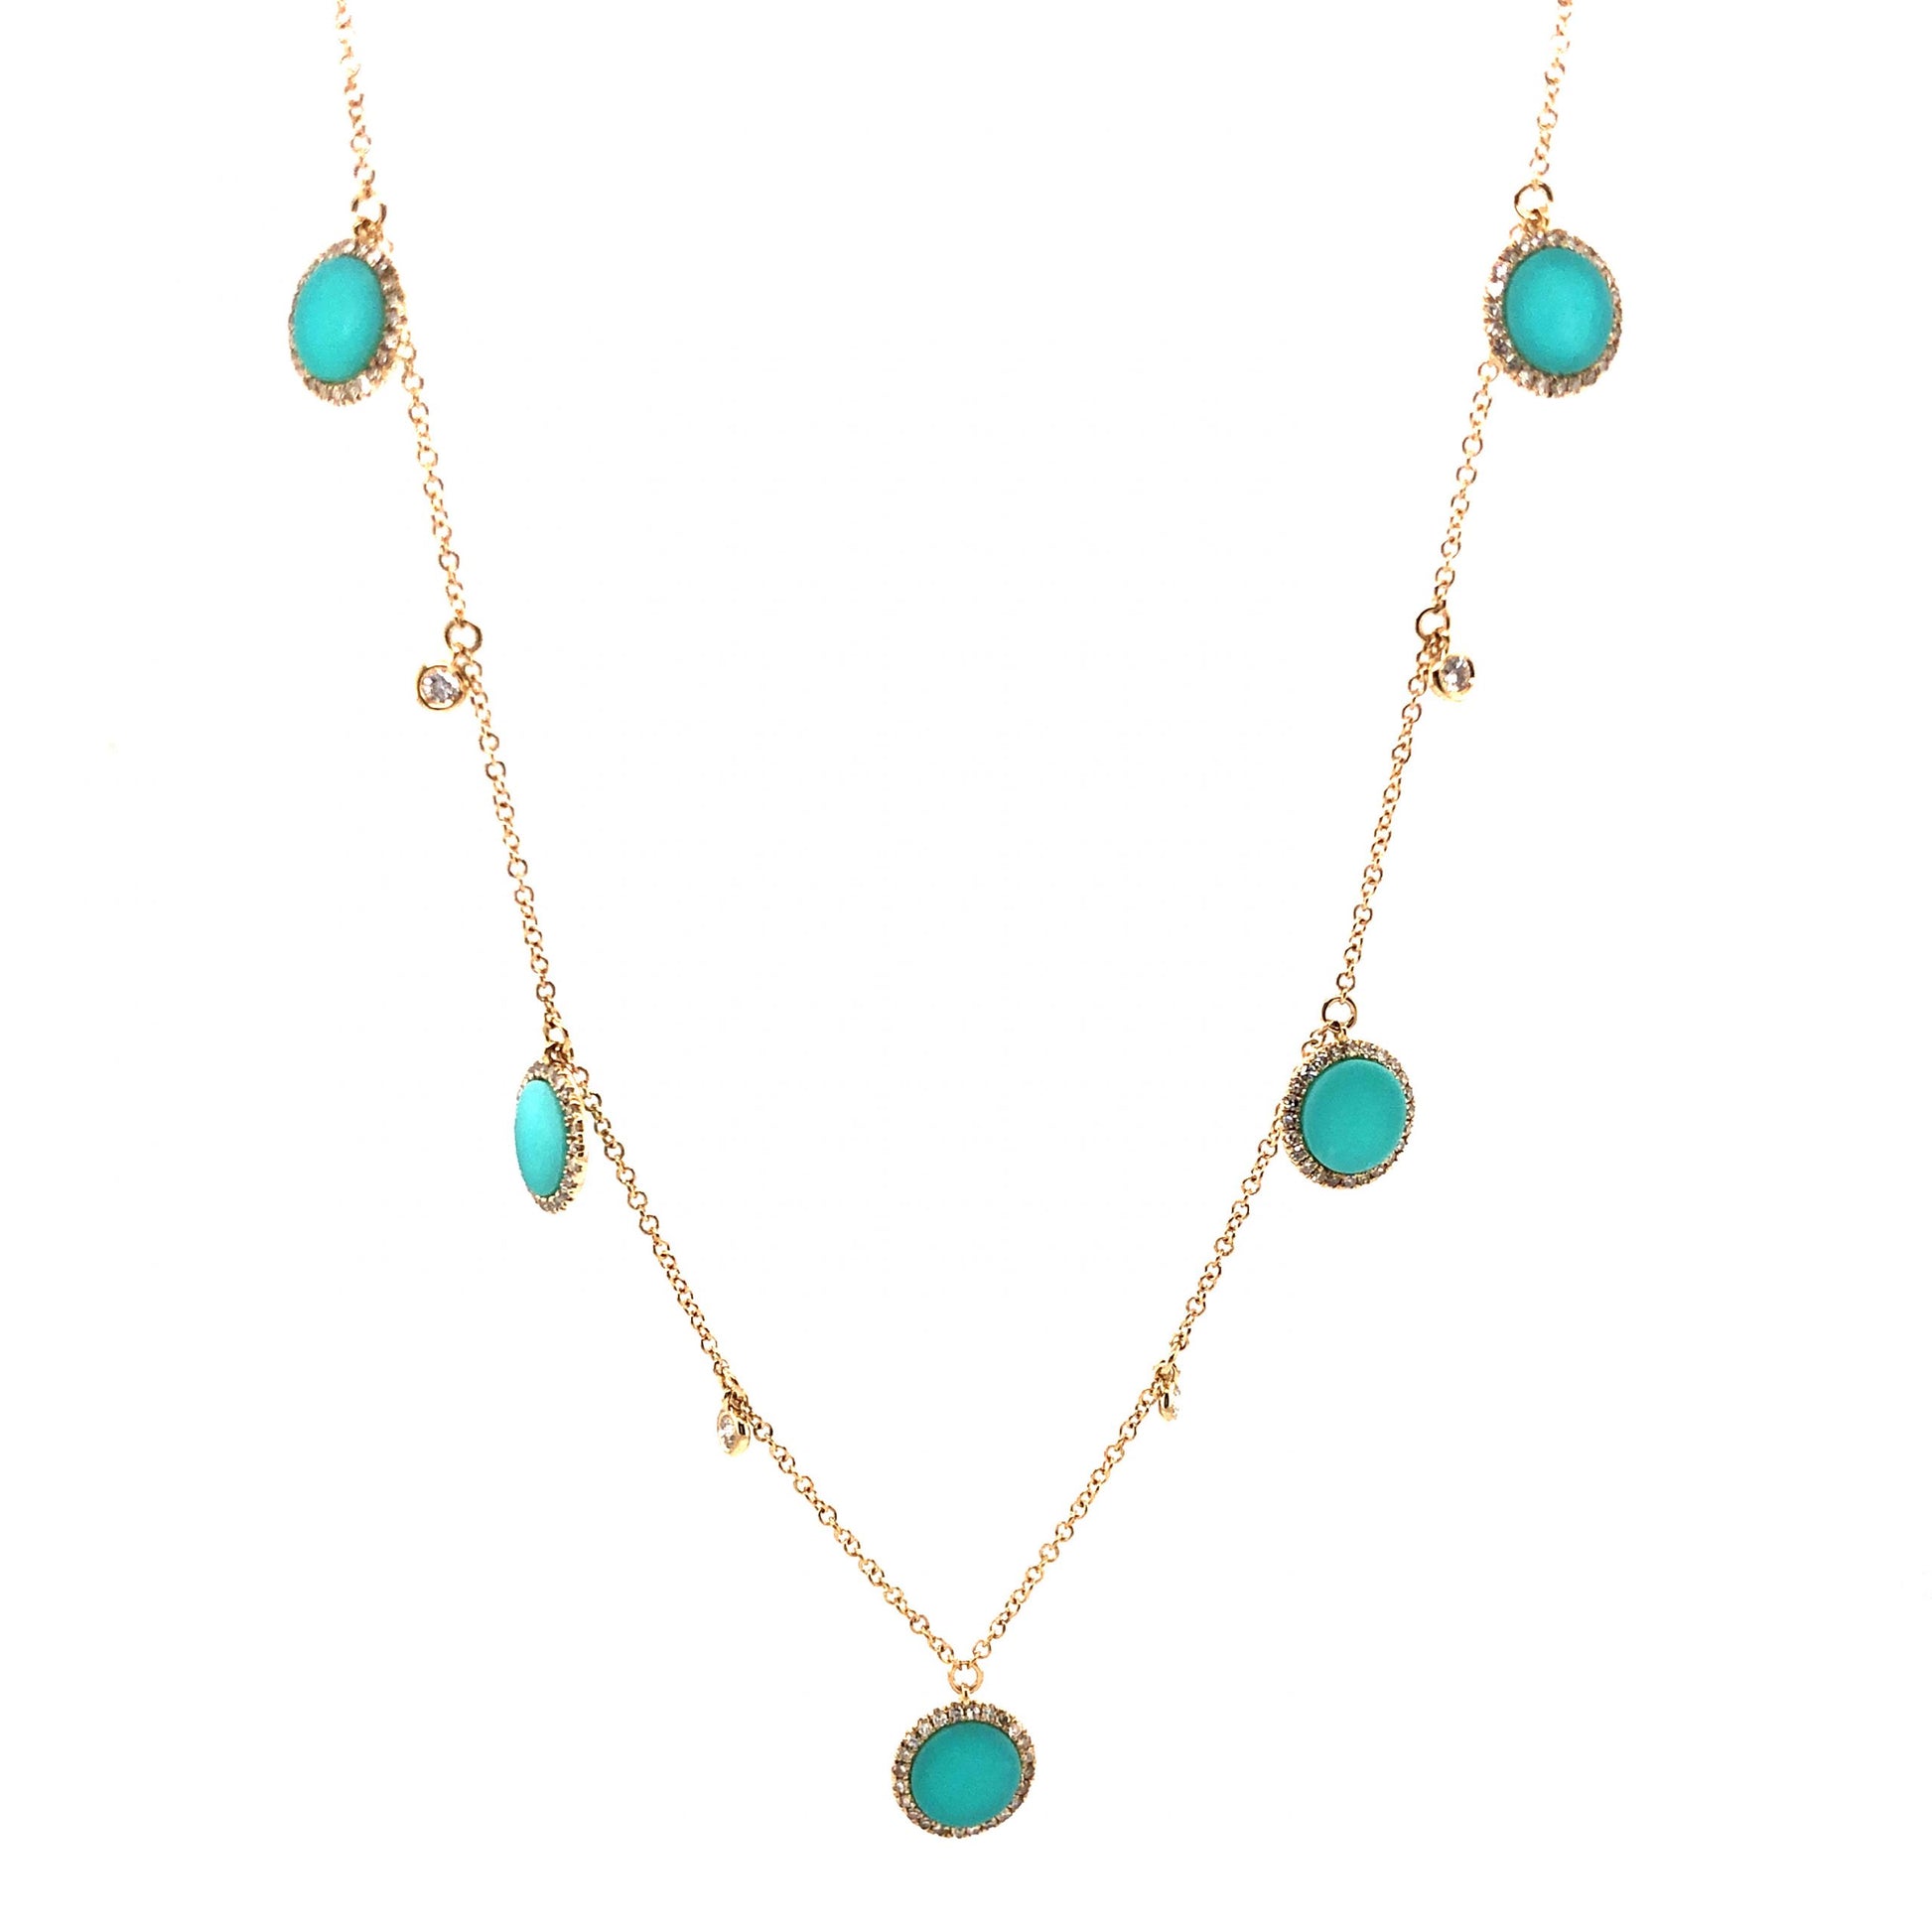 Round Cut Turquoise & Diamond Necklace in 14k Yellow Gold